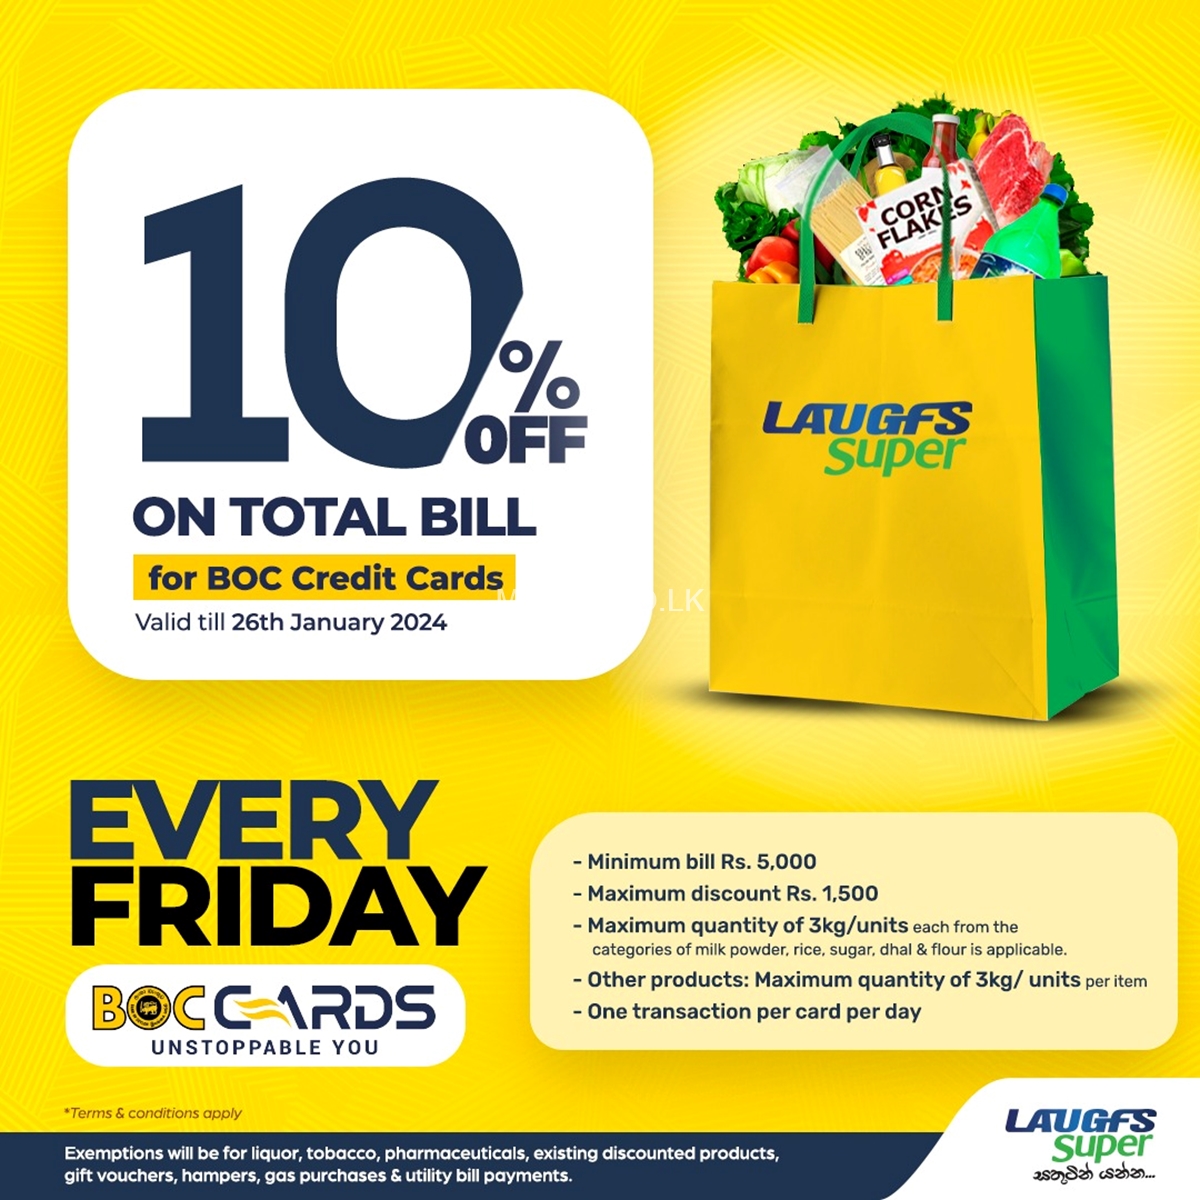 10% Off on Total Bill for BOC Credit Cards at LAUGFS Supermarket